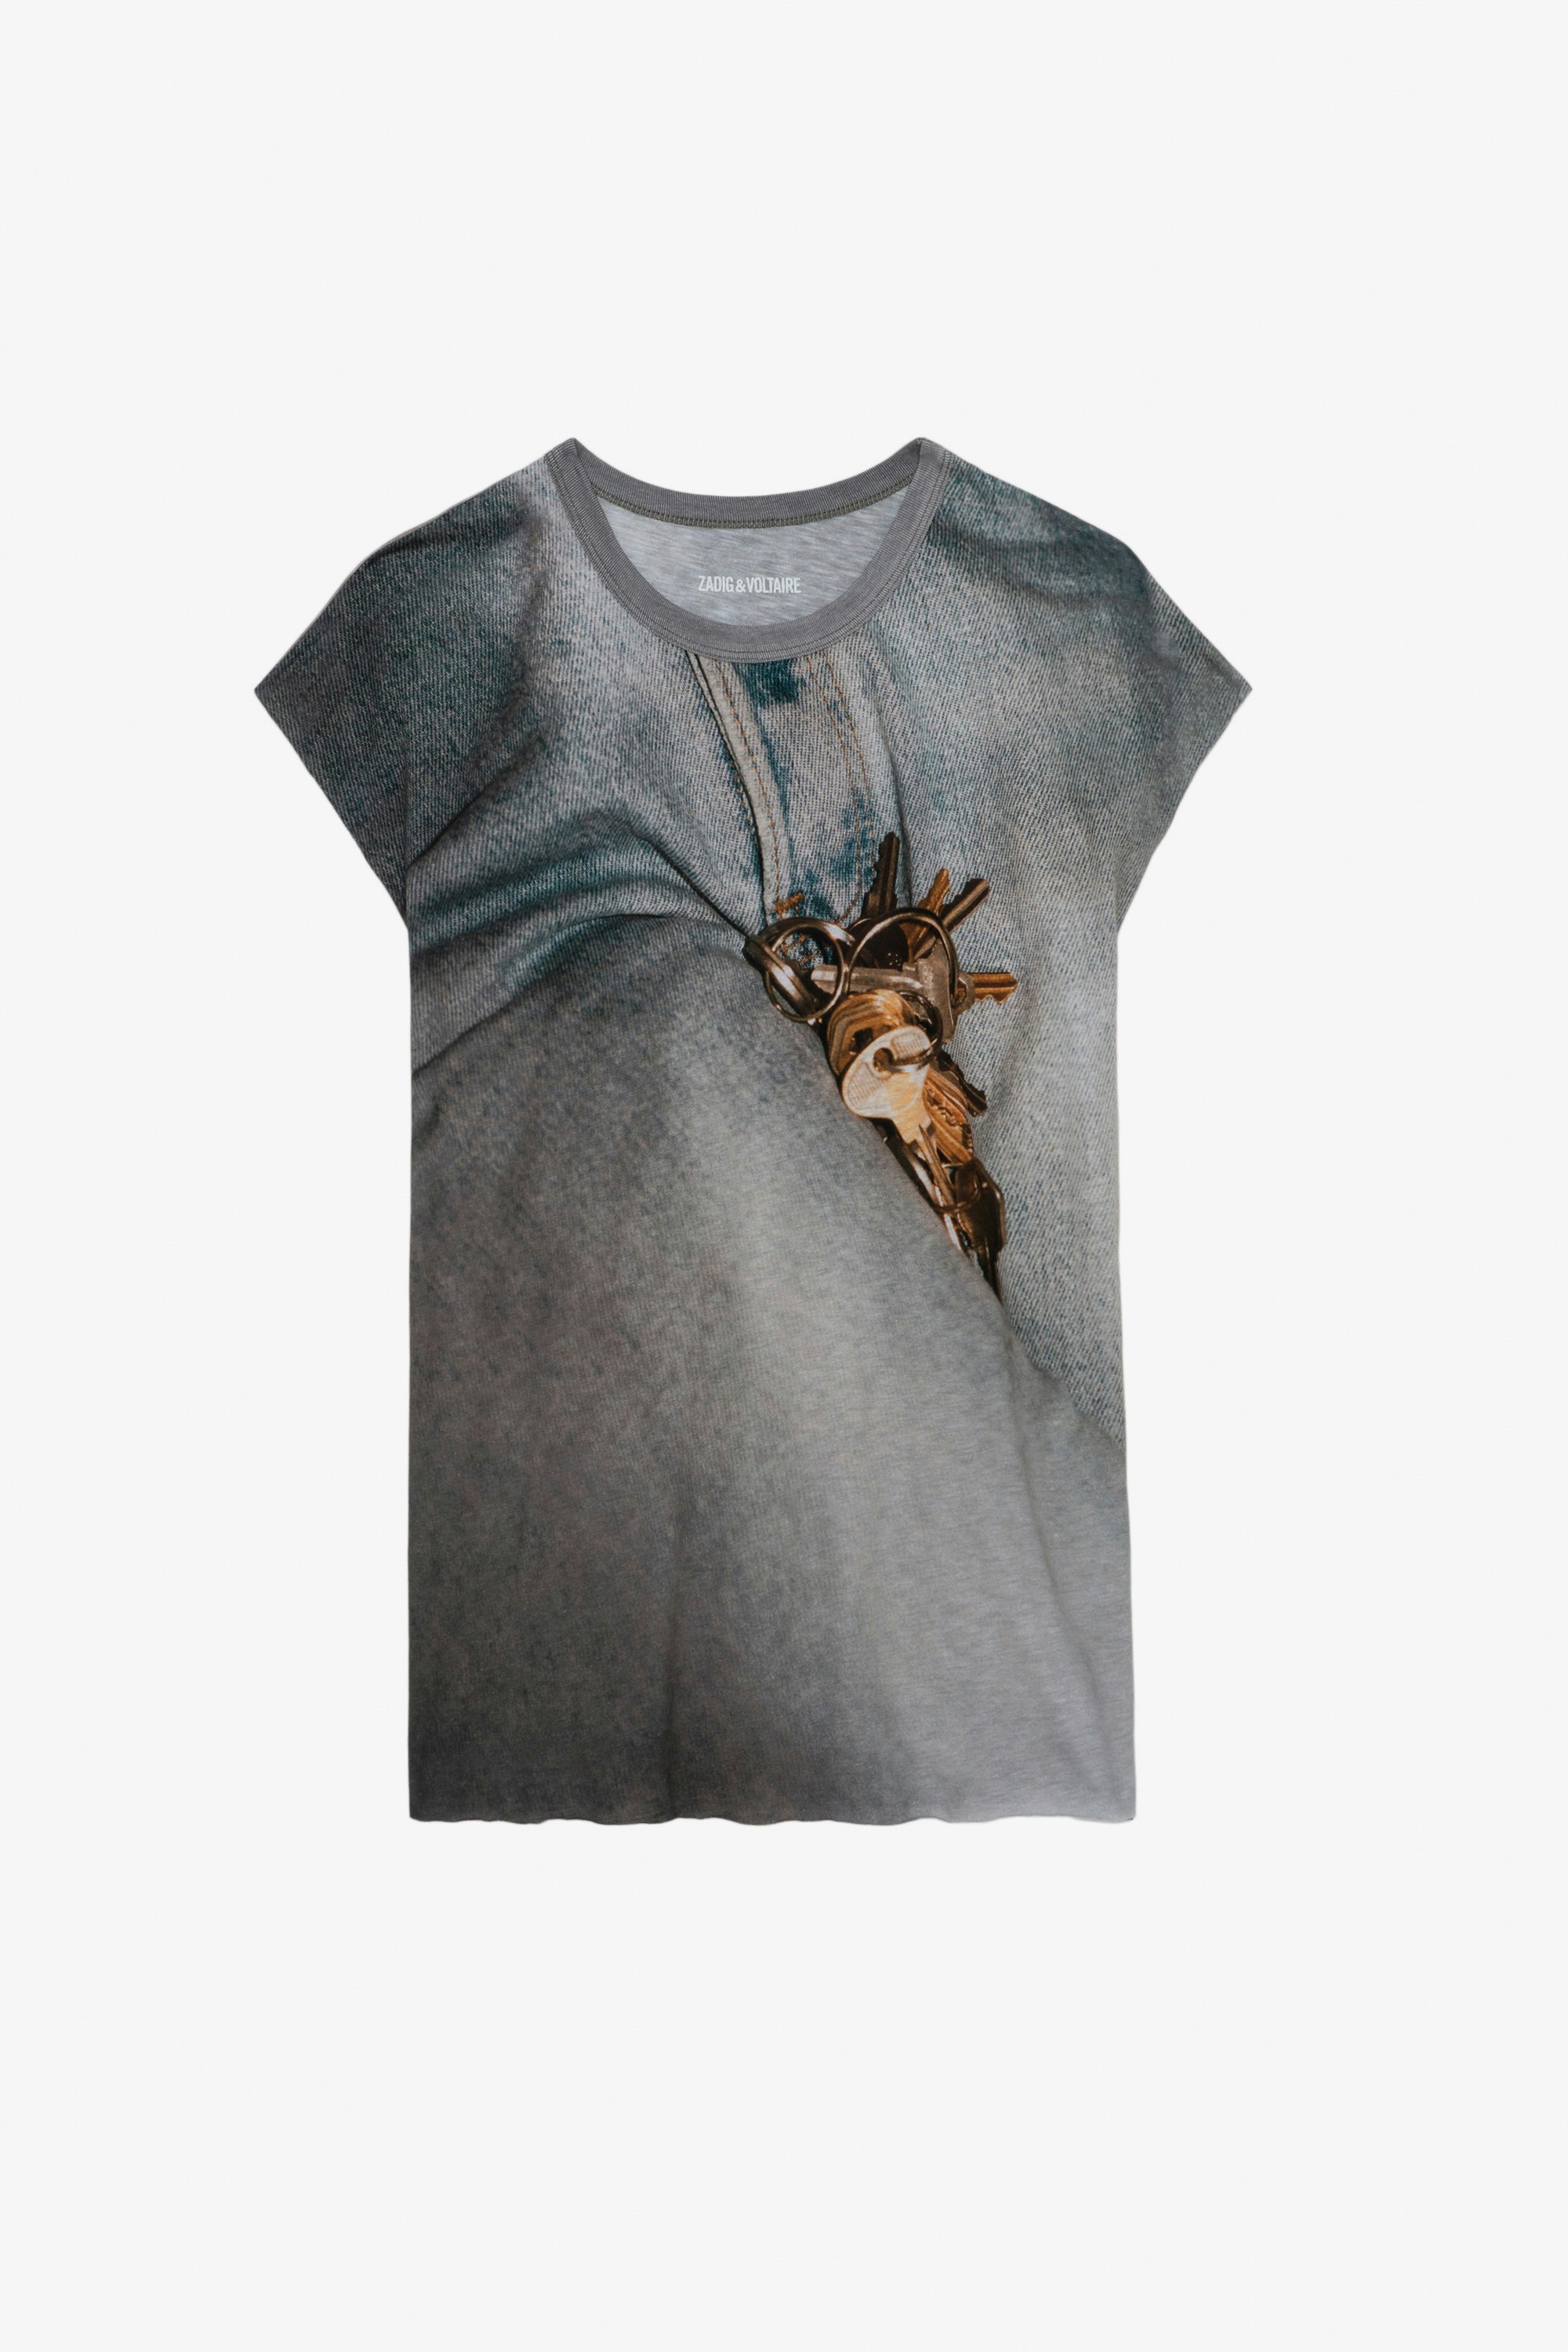 Cecilia Tank Top - Carbon grey biker-style tank top with Key print and raw edges.